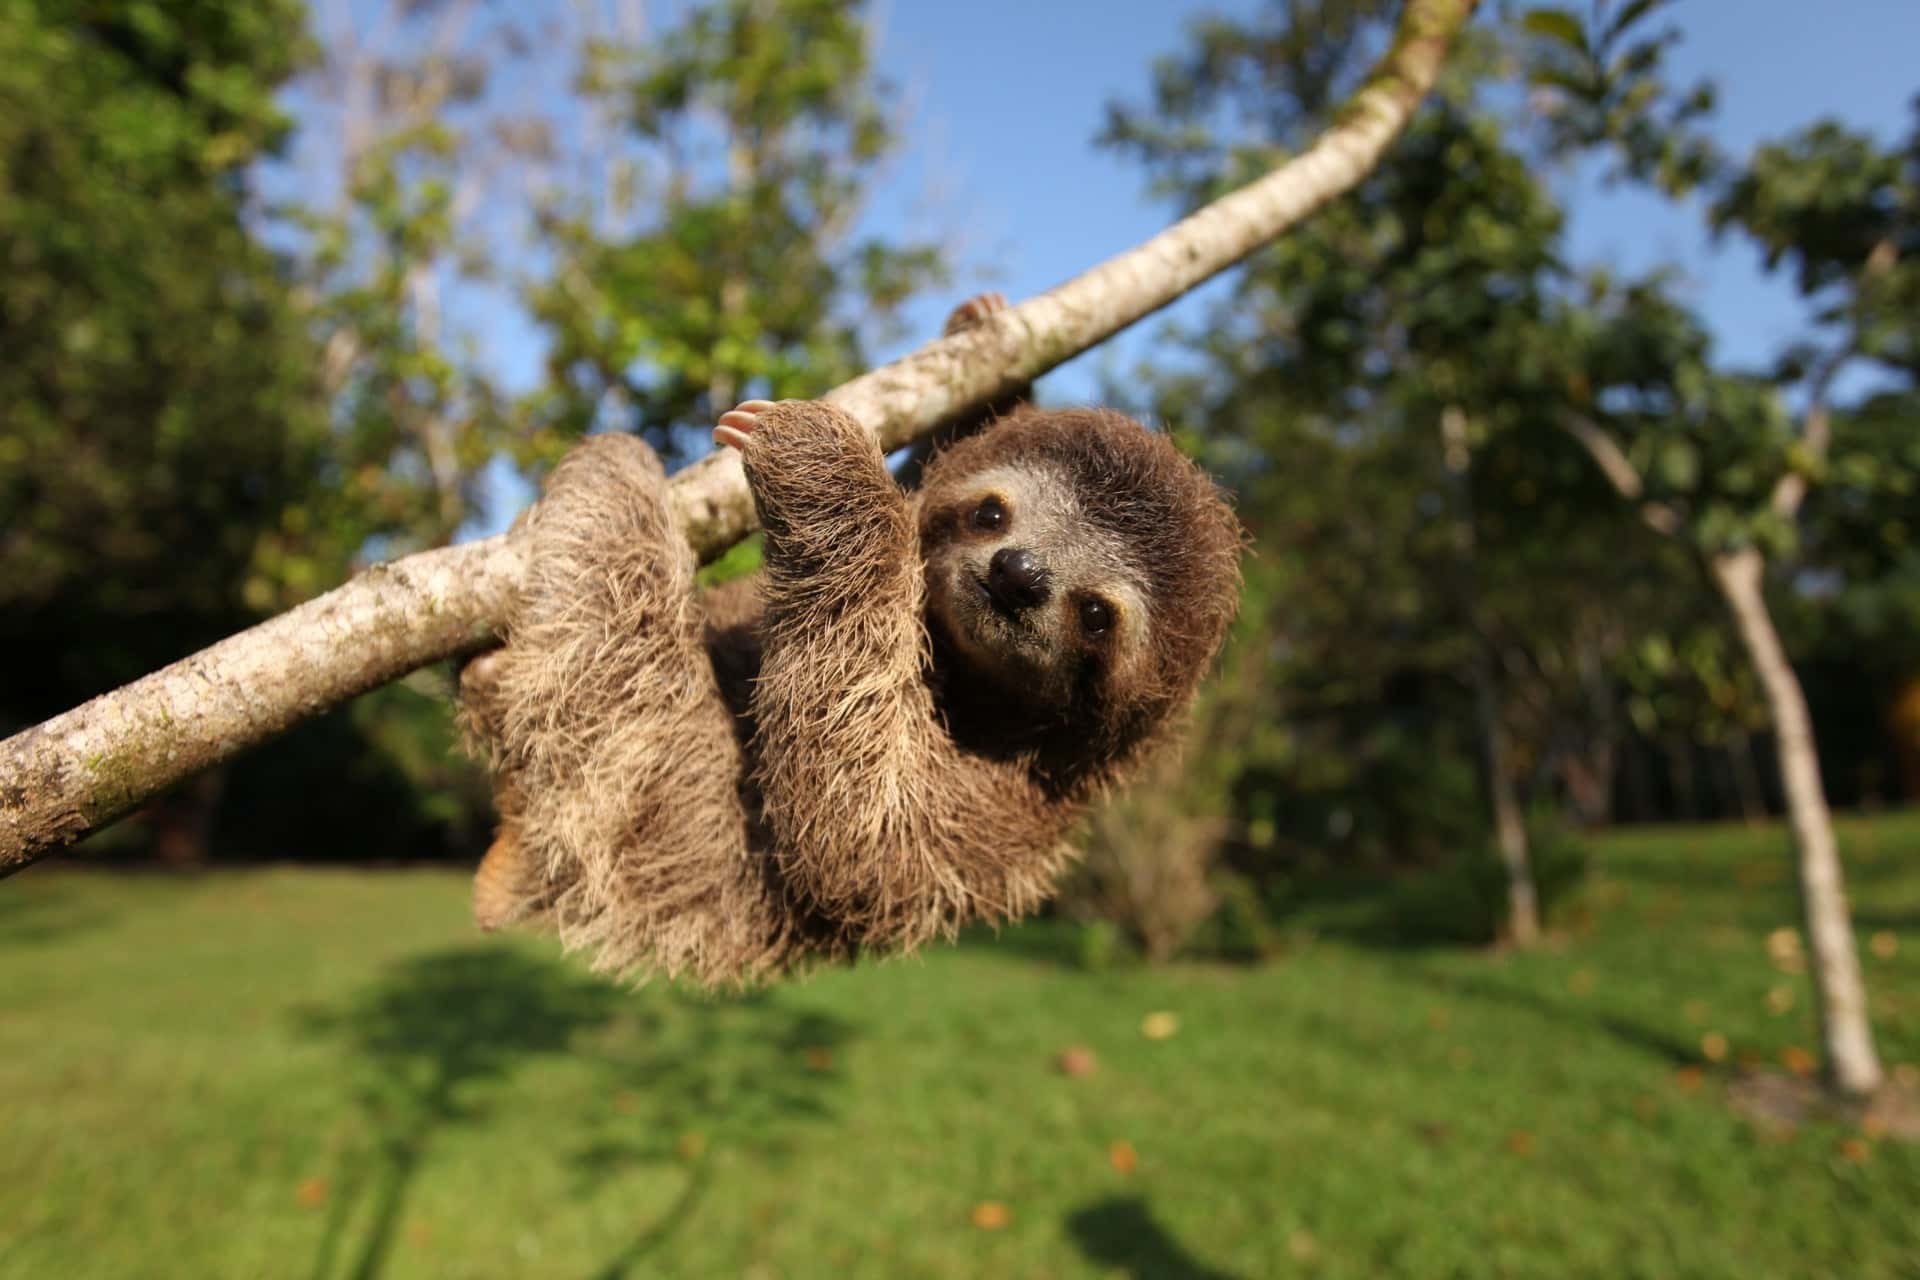 This Baby Sloth Is Happy and Adorably Cute!